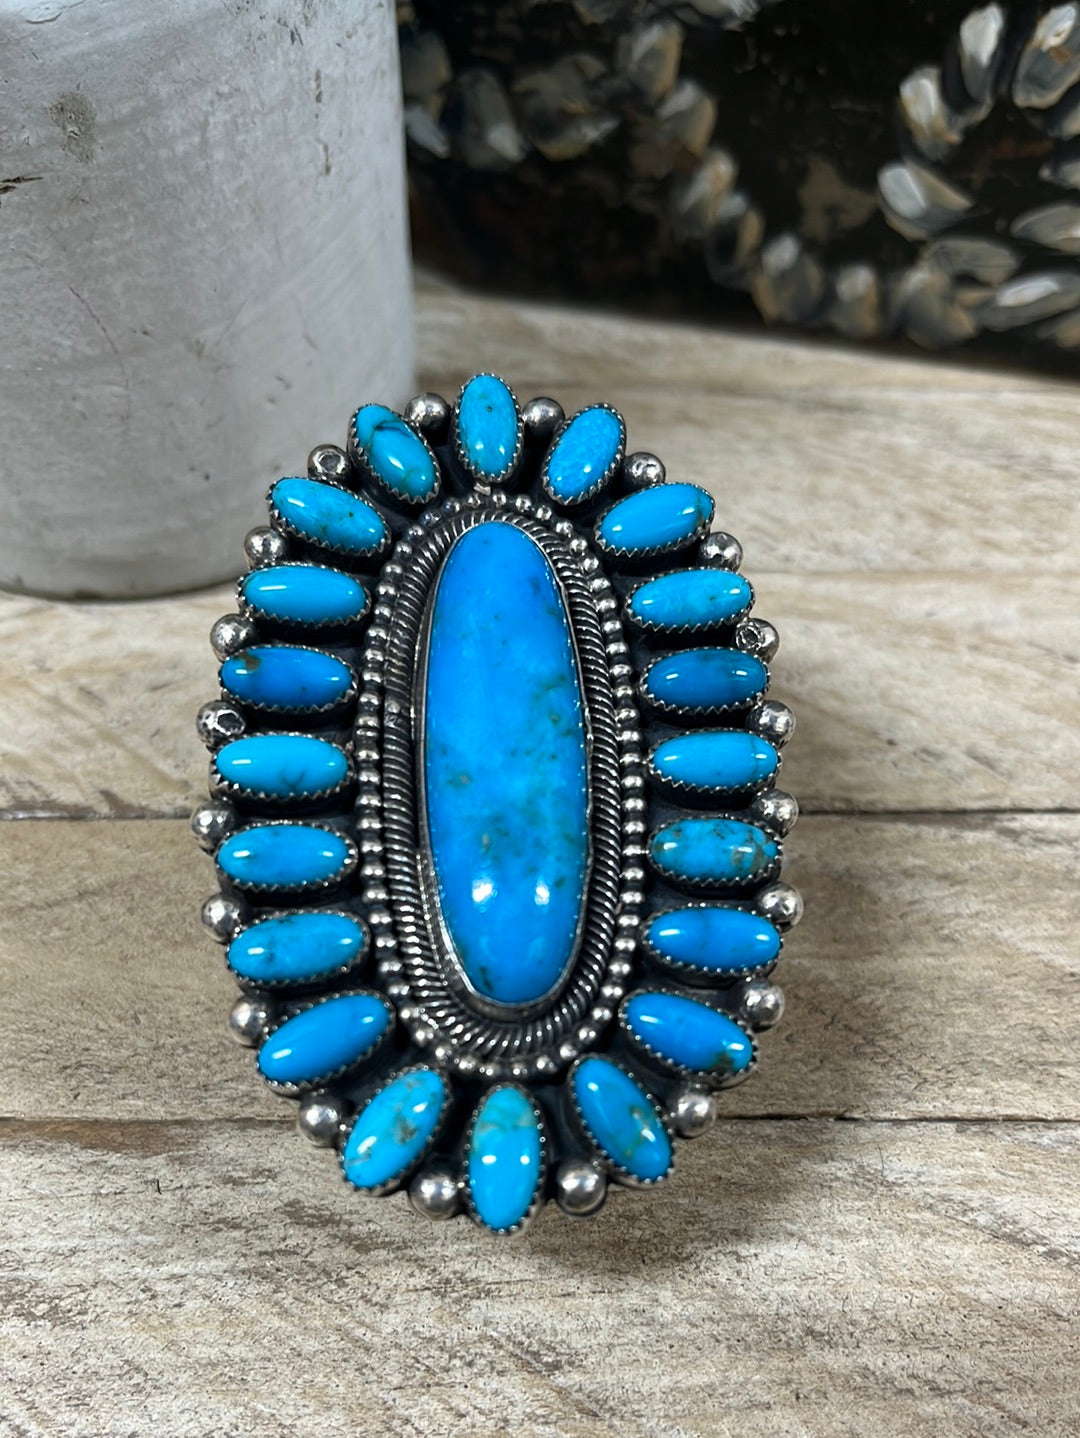 Acadia Oval Cluster 3" Turquoise Ring - Adjustable